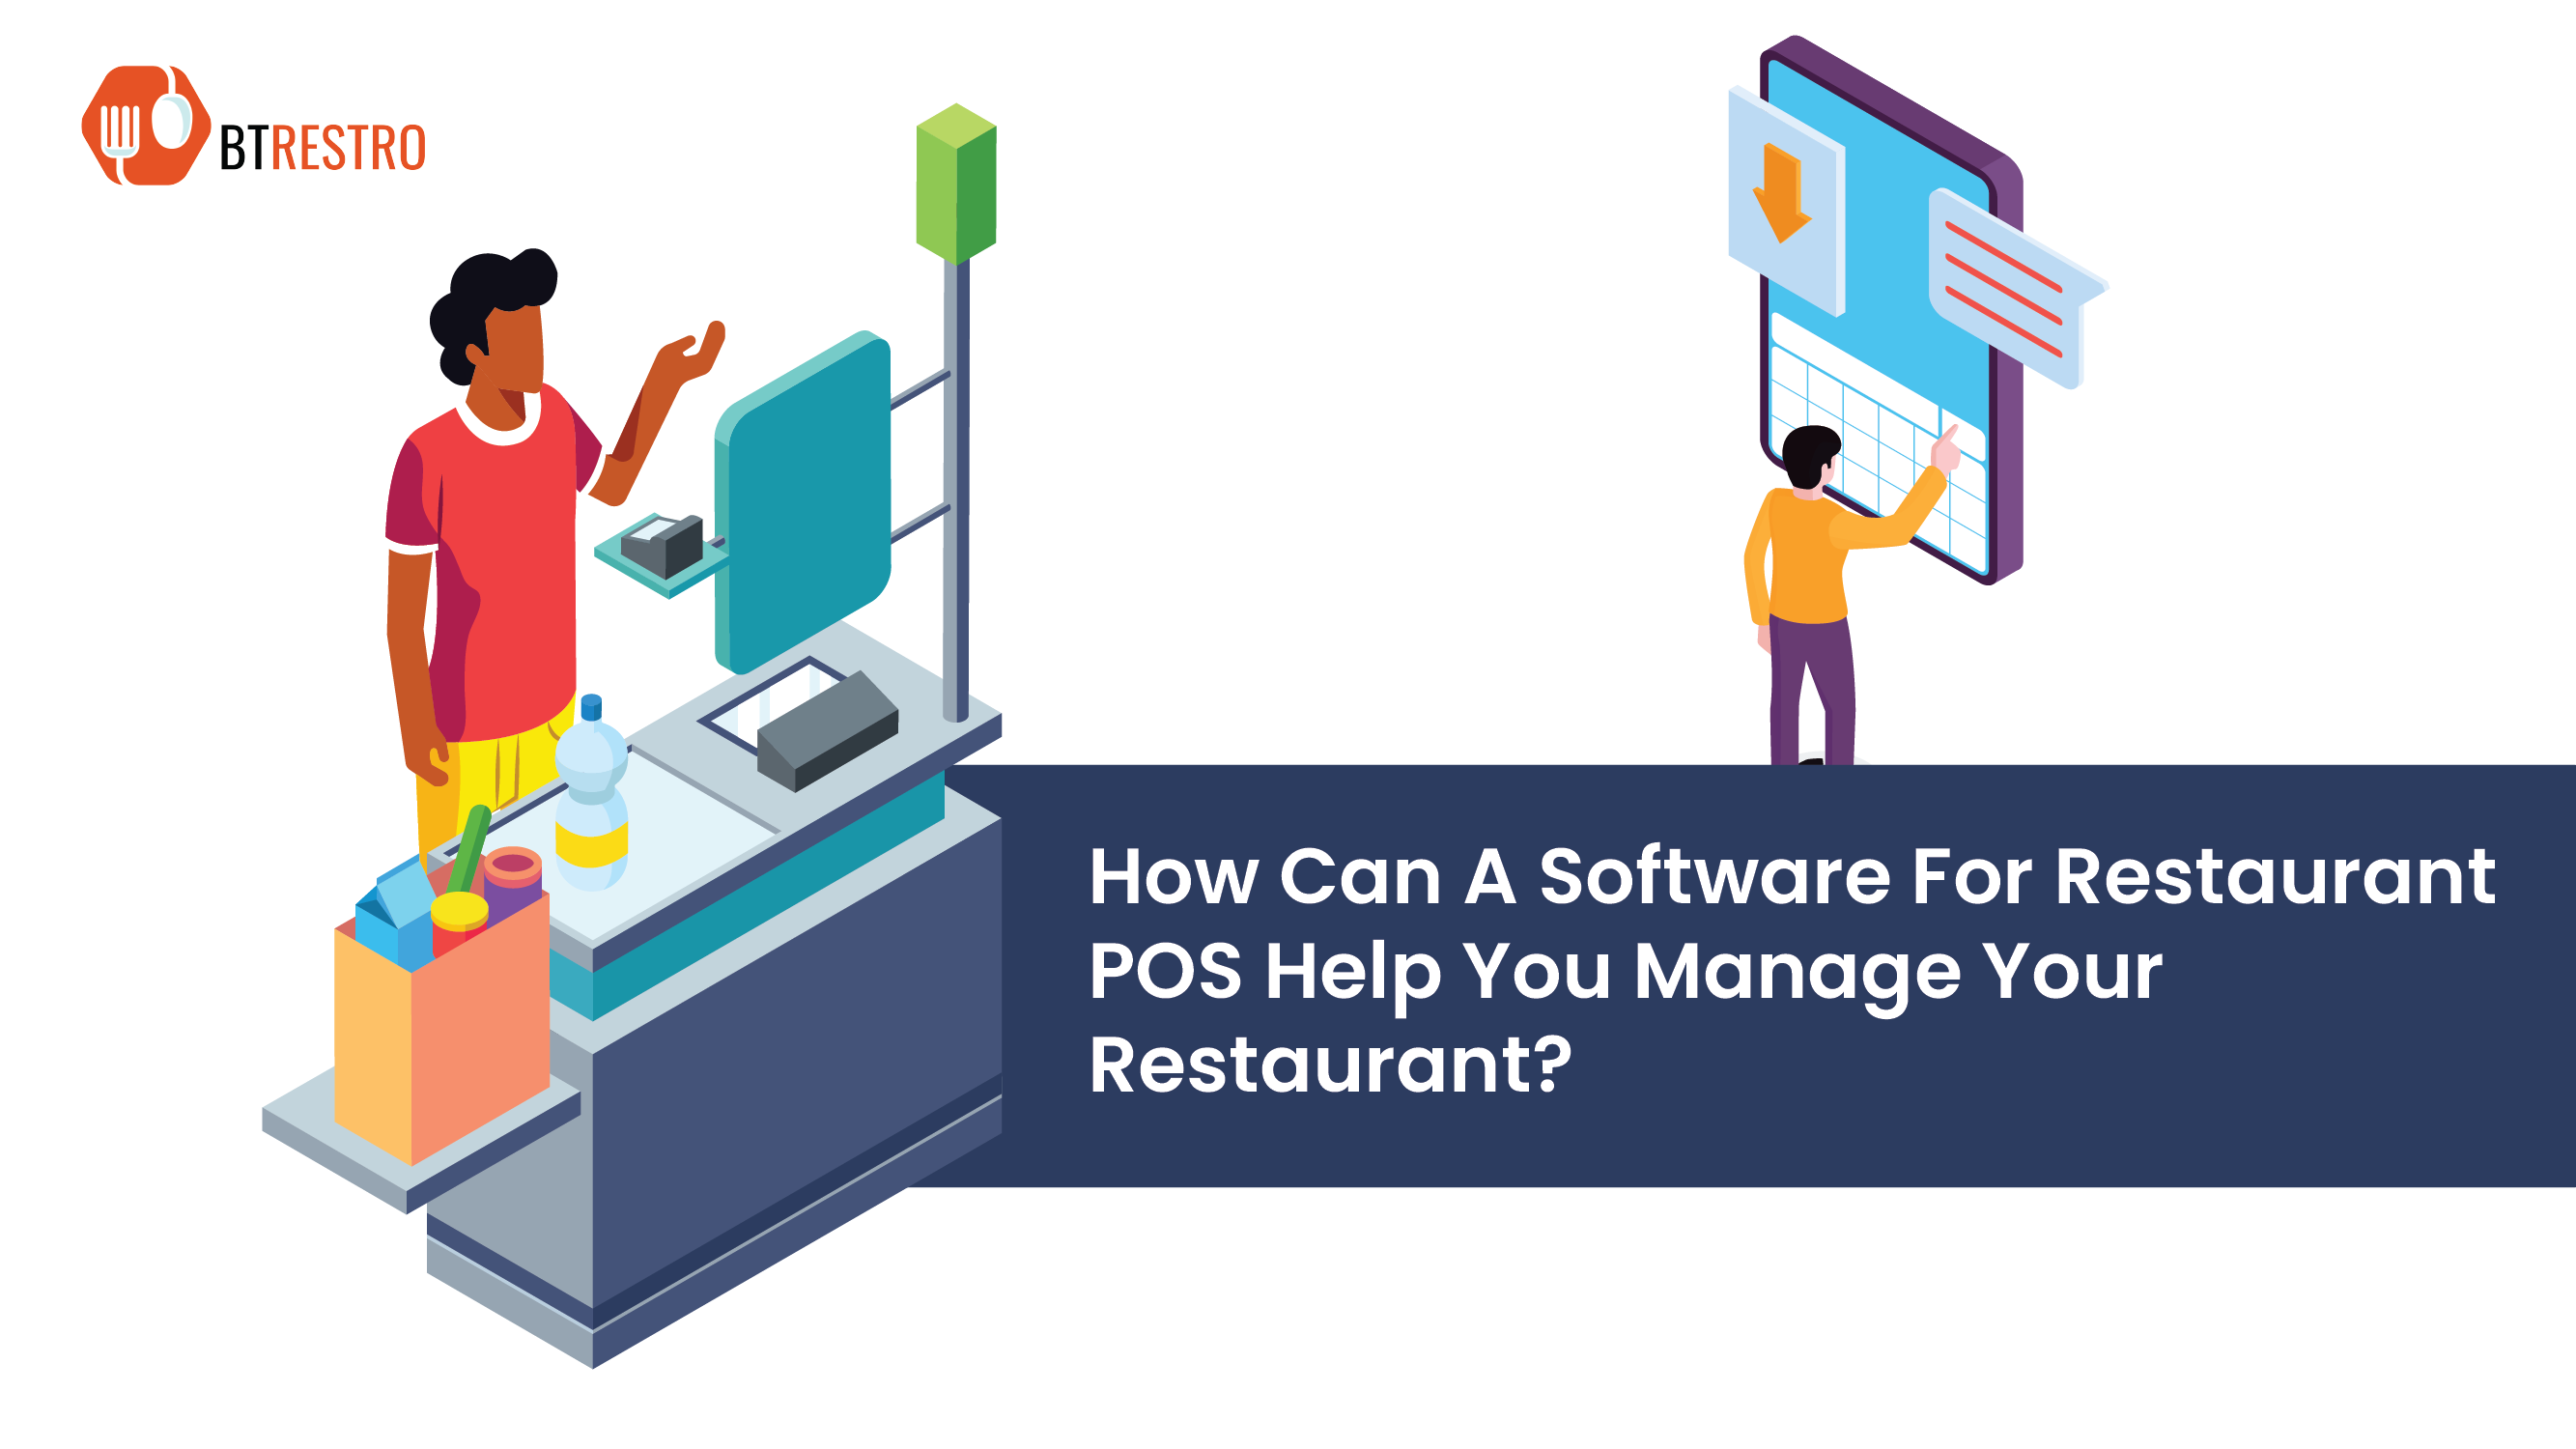 How Can A Software For Restaurant POS Help You Manage Your Restaurant?